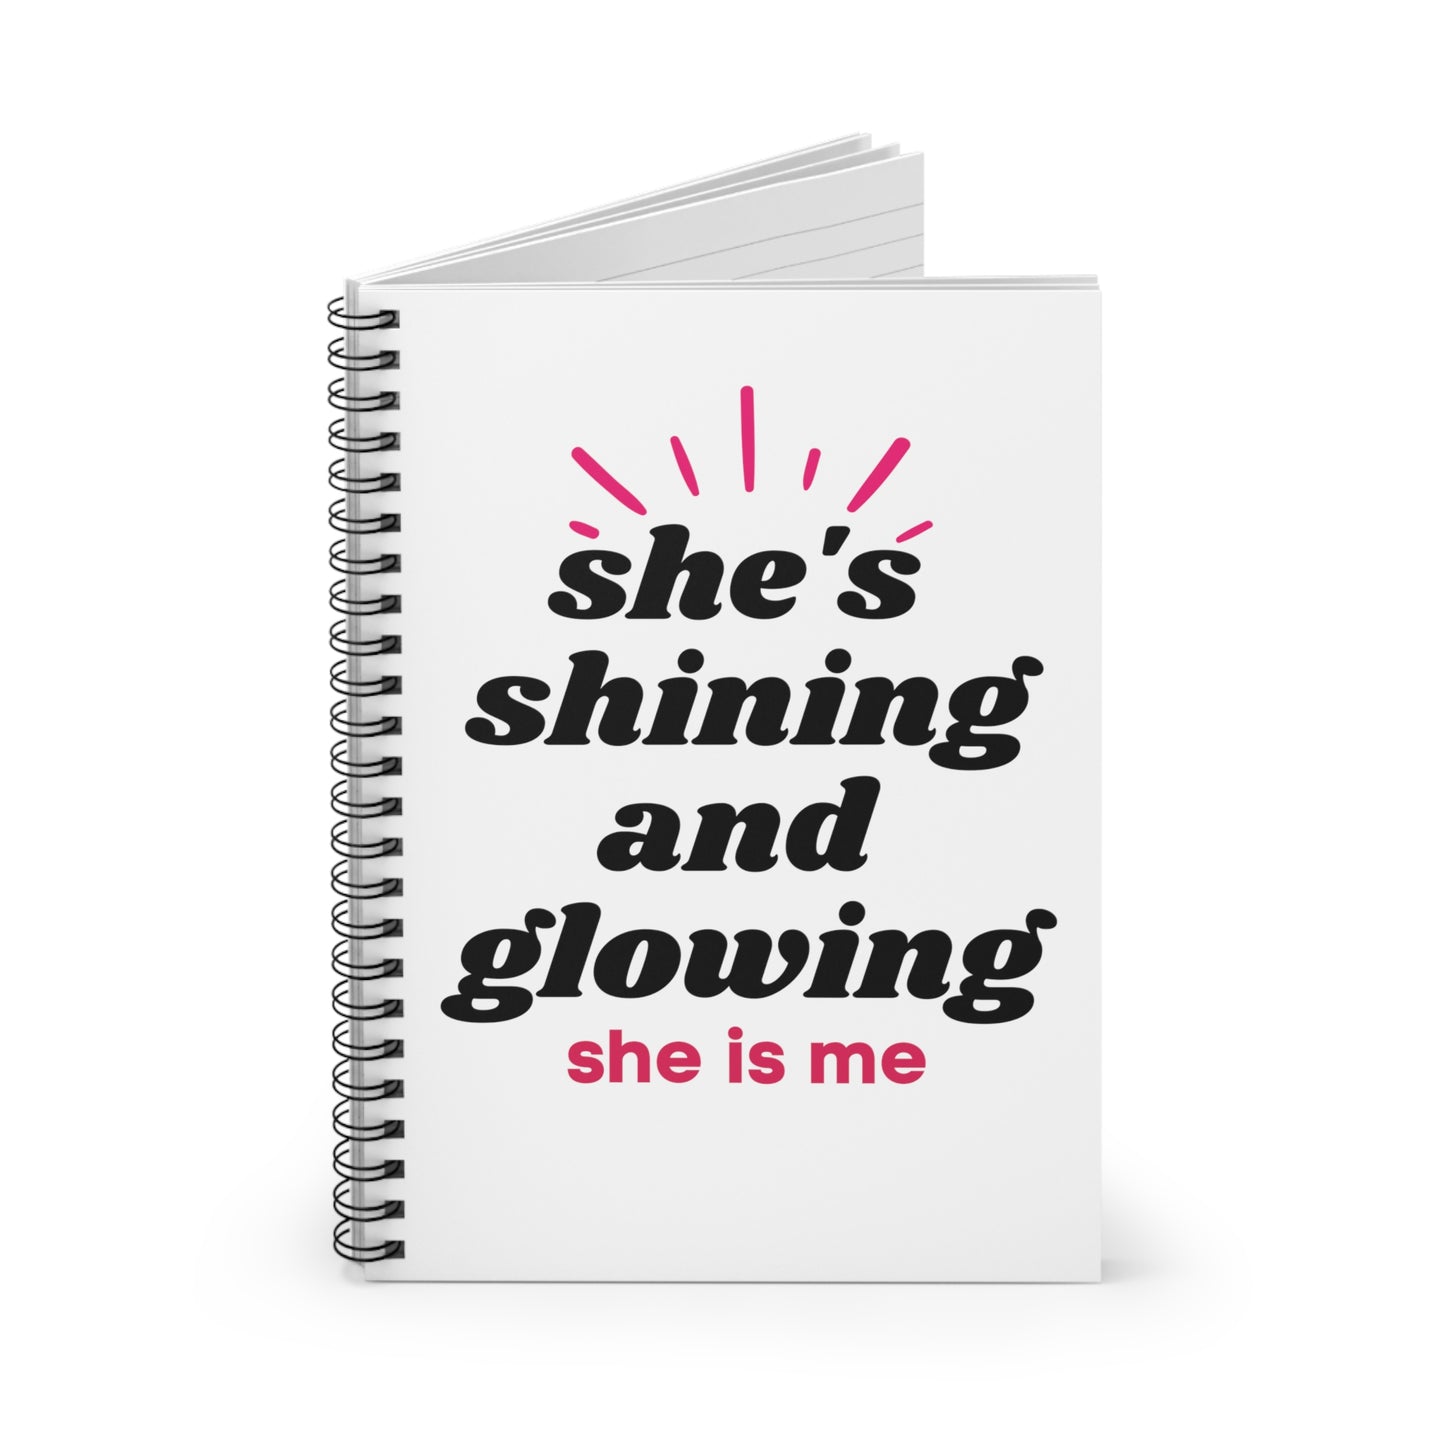 She's Shining and Glowing - She is me -  Spiral Notebook - Ruled Line